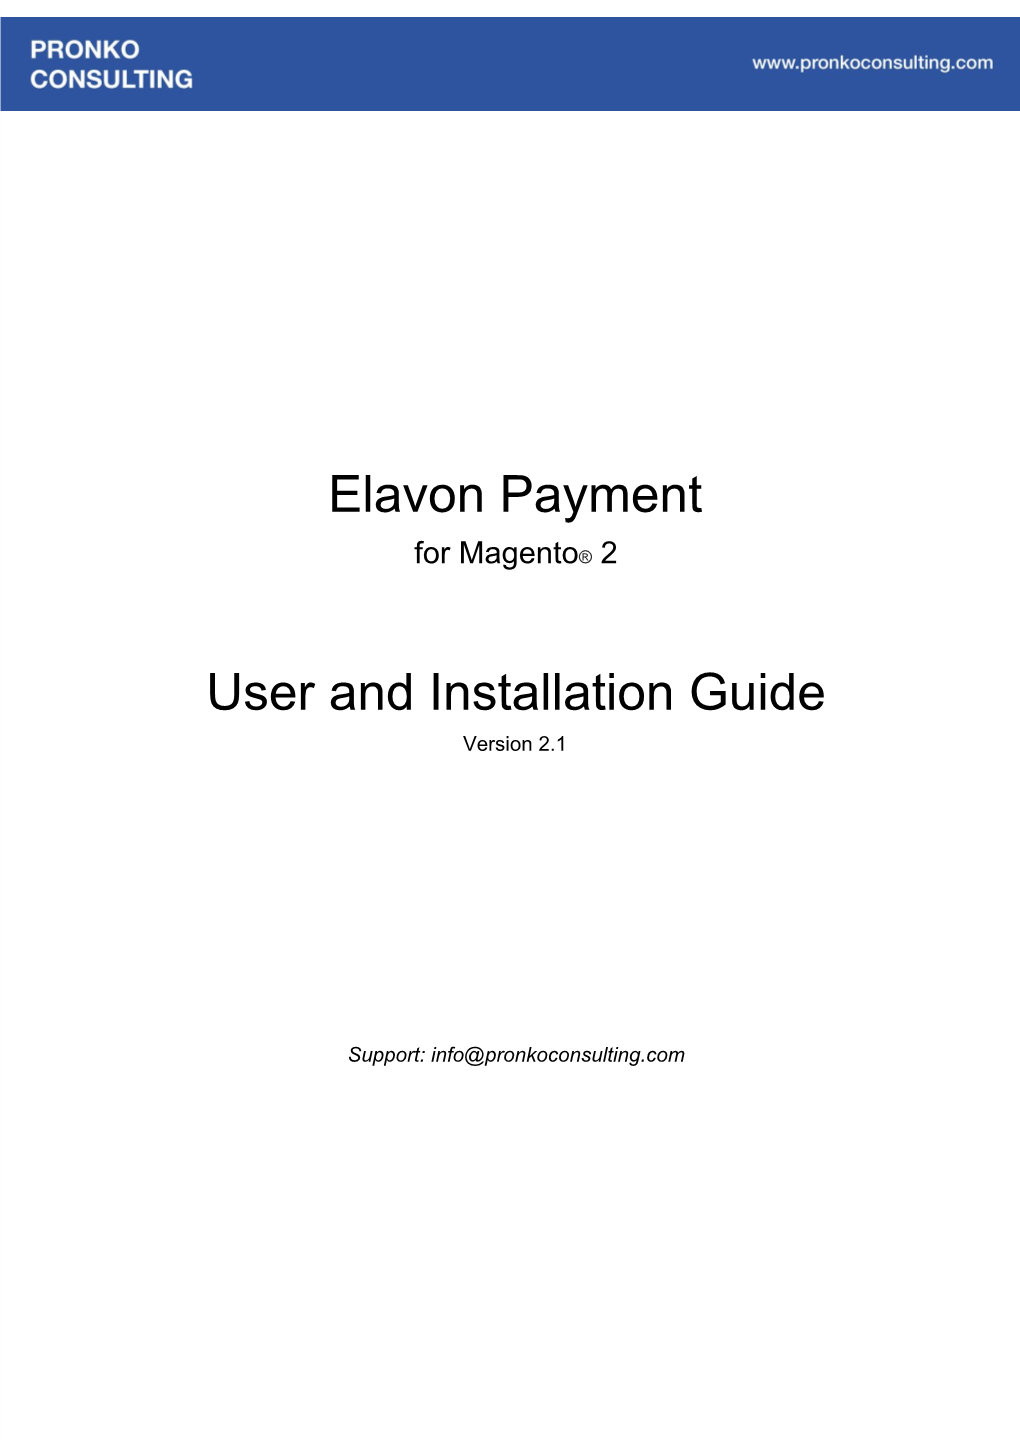 Elavon Payment User and Installation Guide